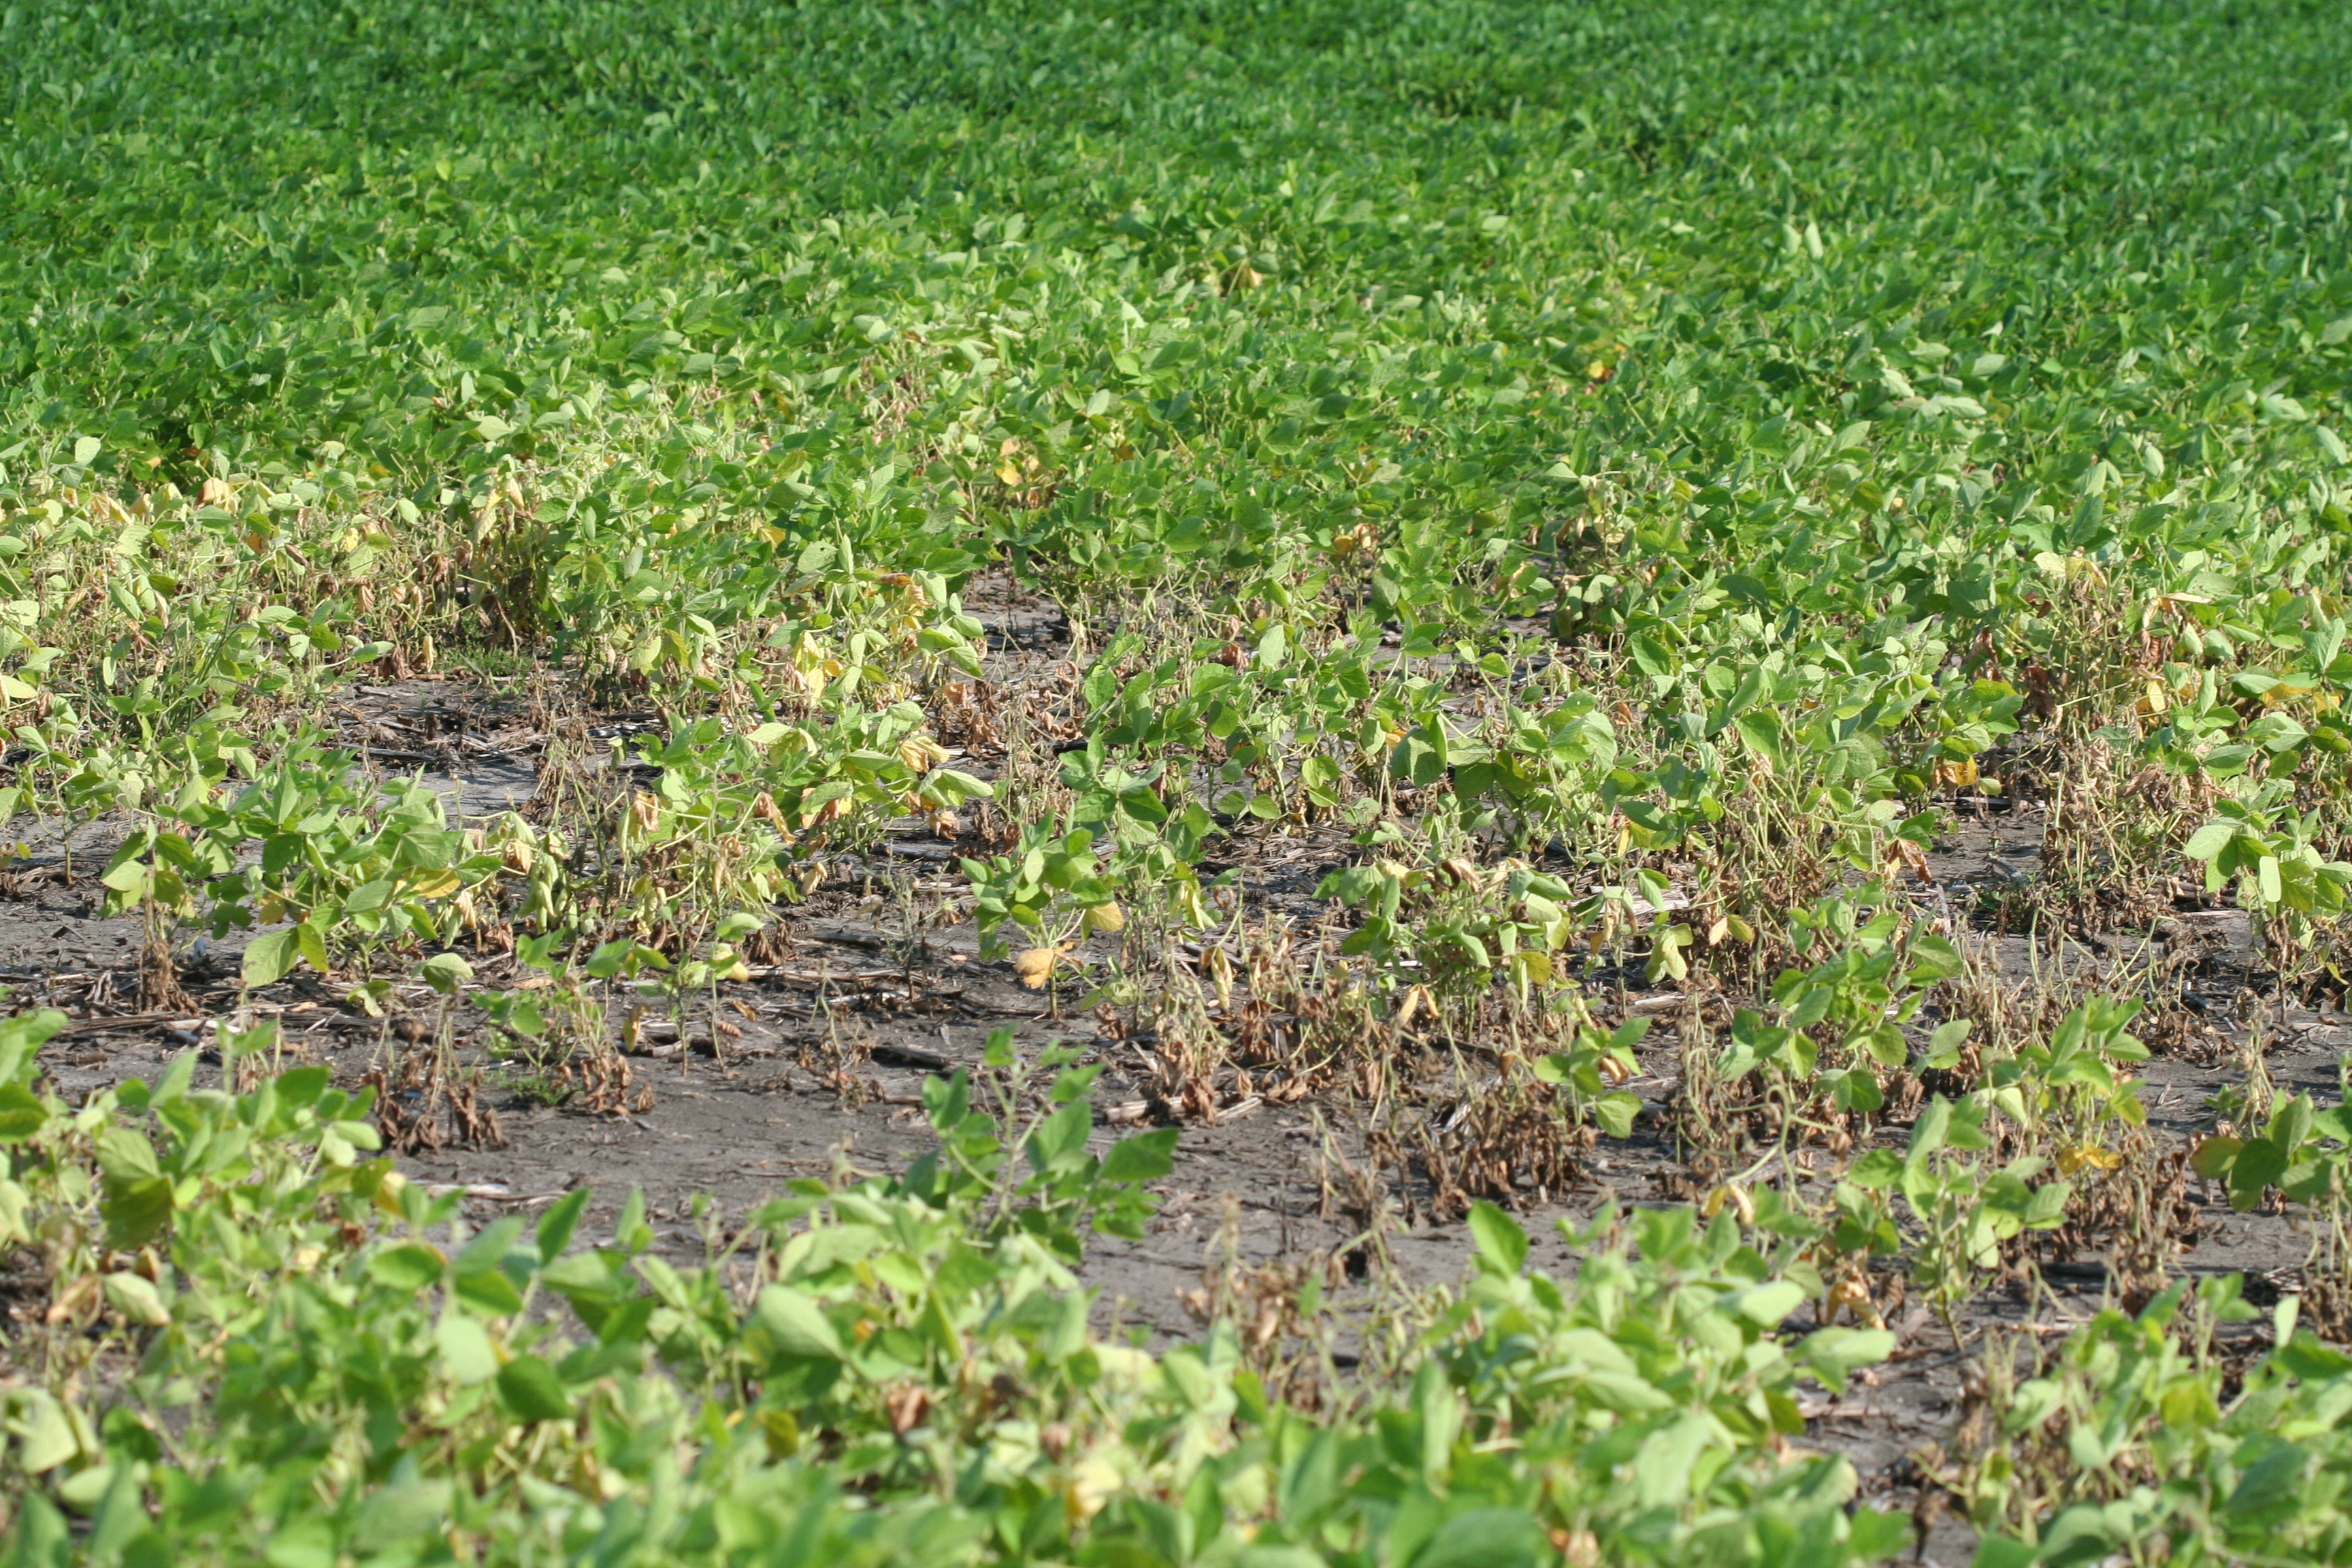 Patch of soybean plants infected by Phytophthora sojae.